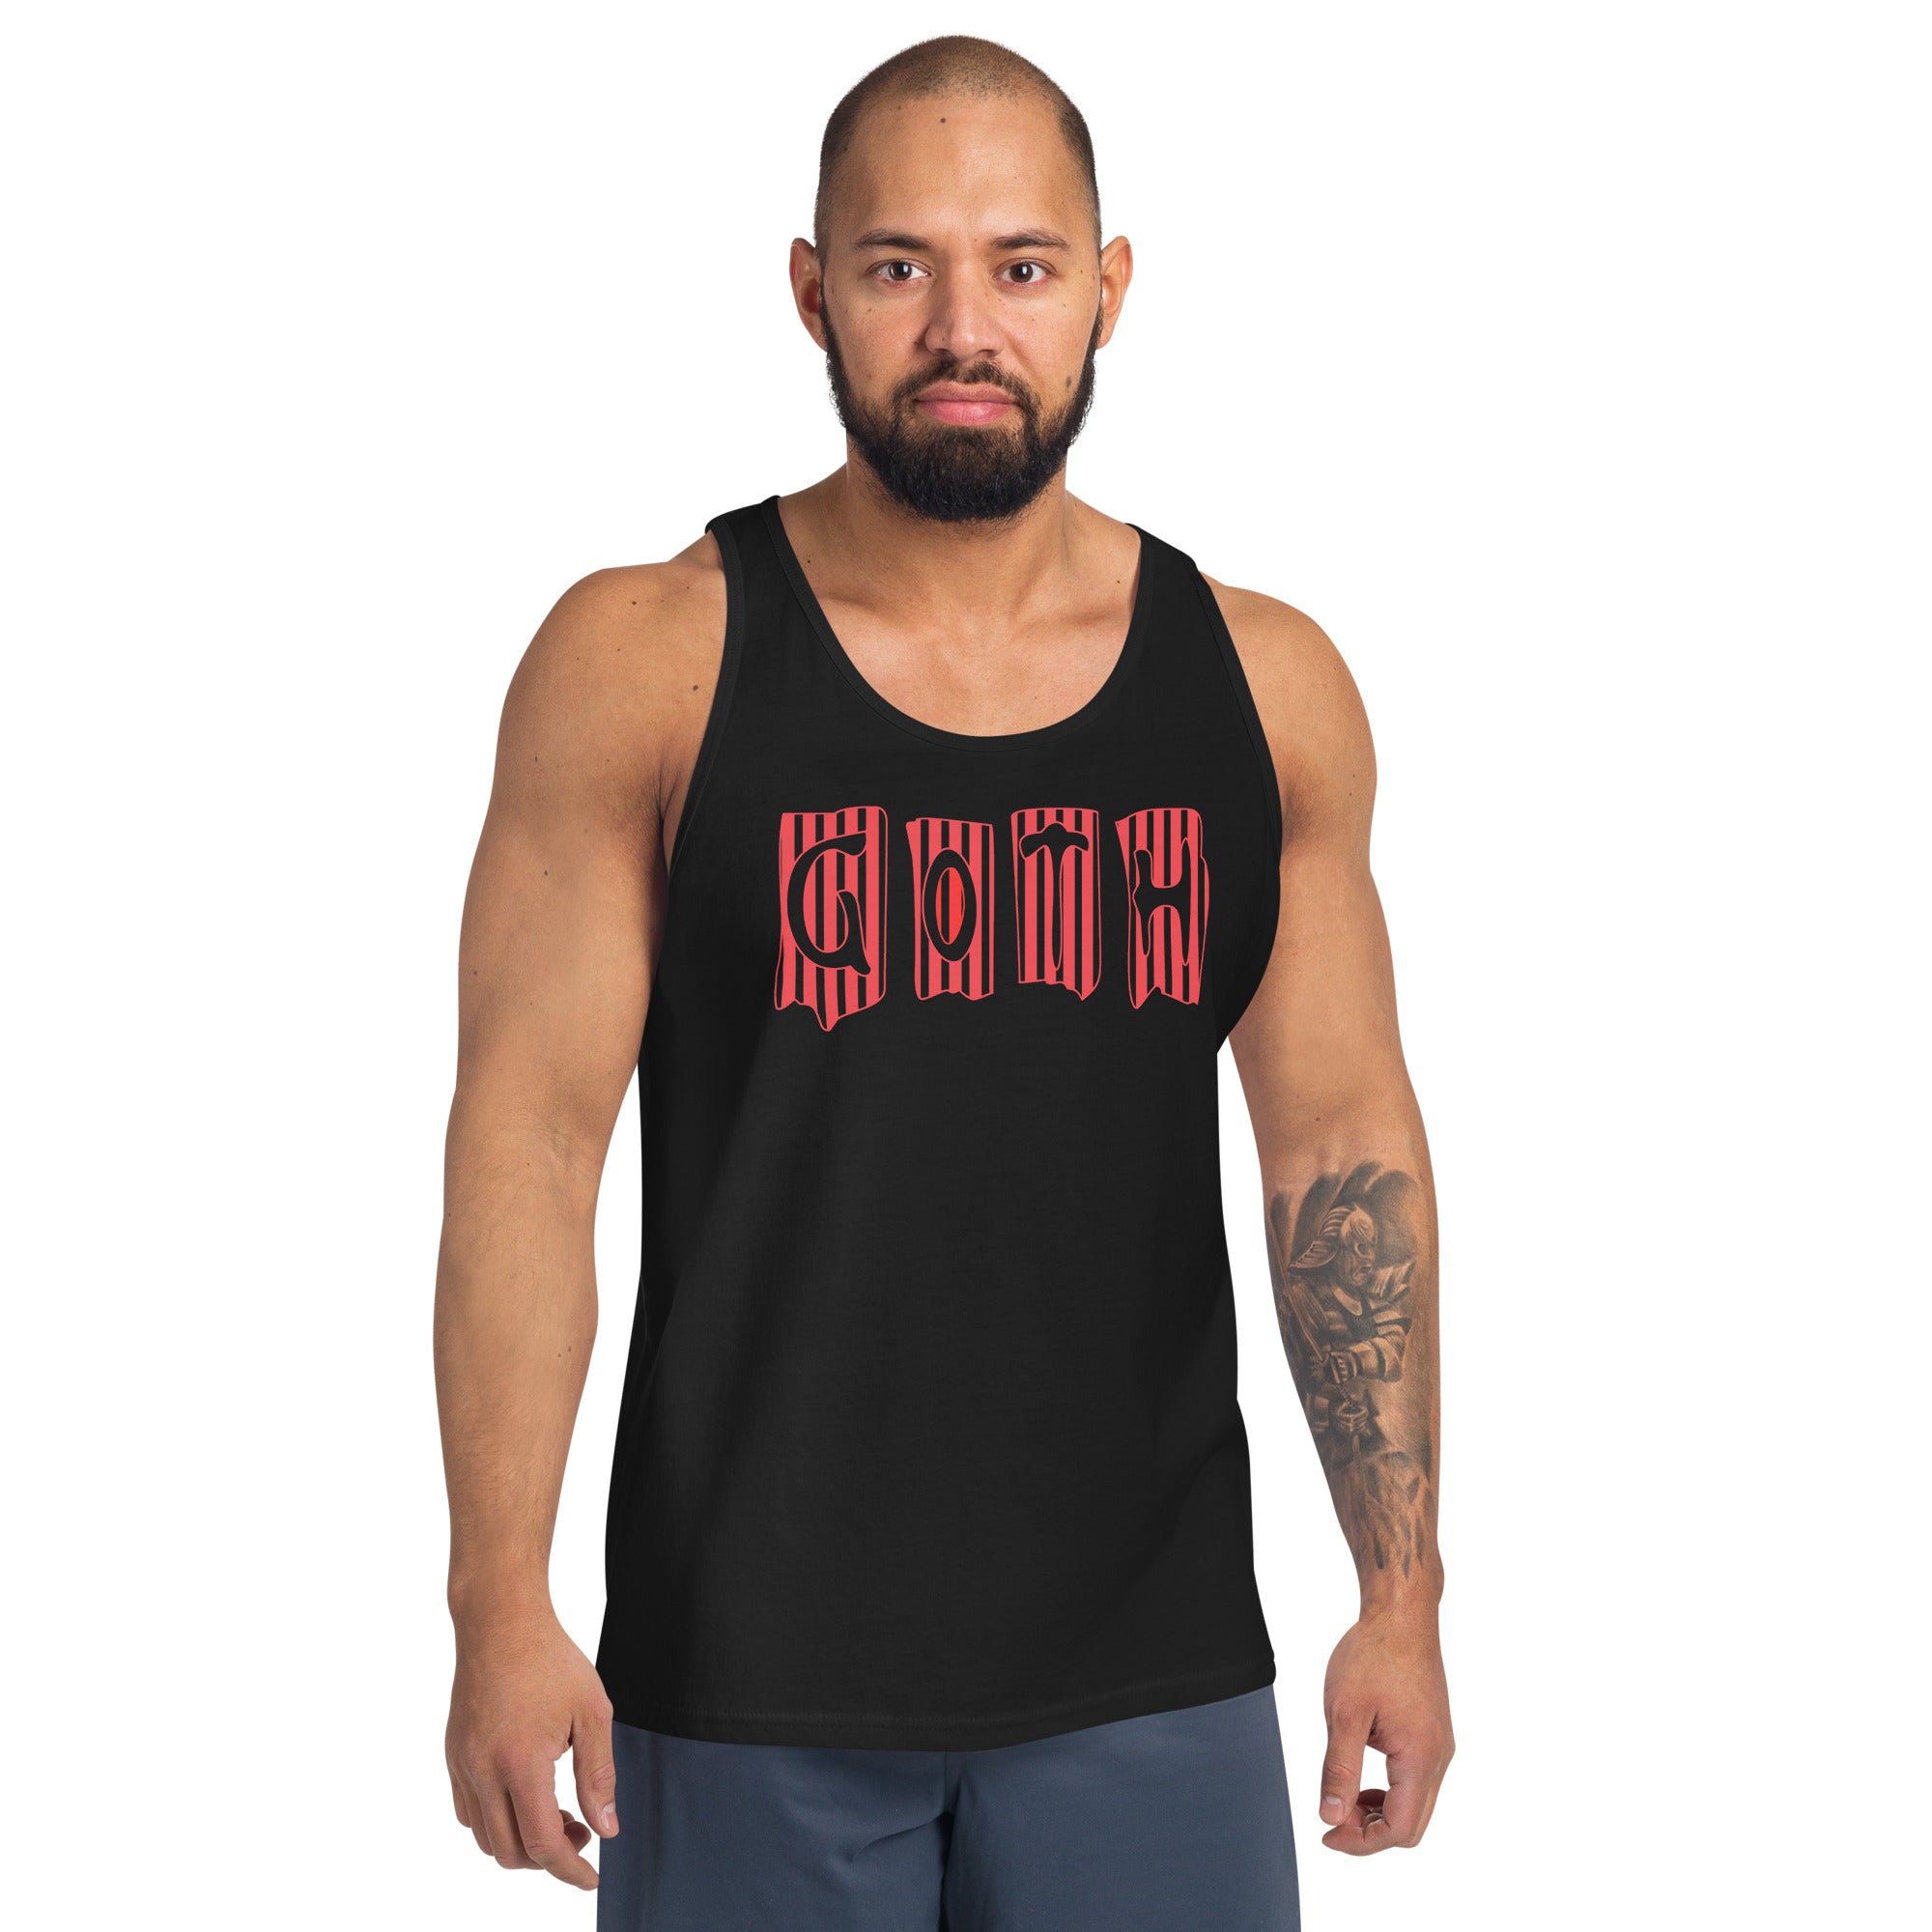 Black and Red Vertical Stripe Goth Wallpaper Style Men's Tank Top